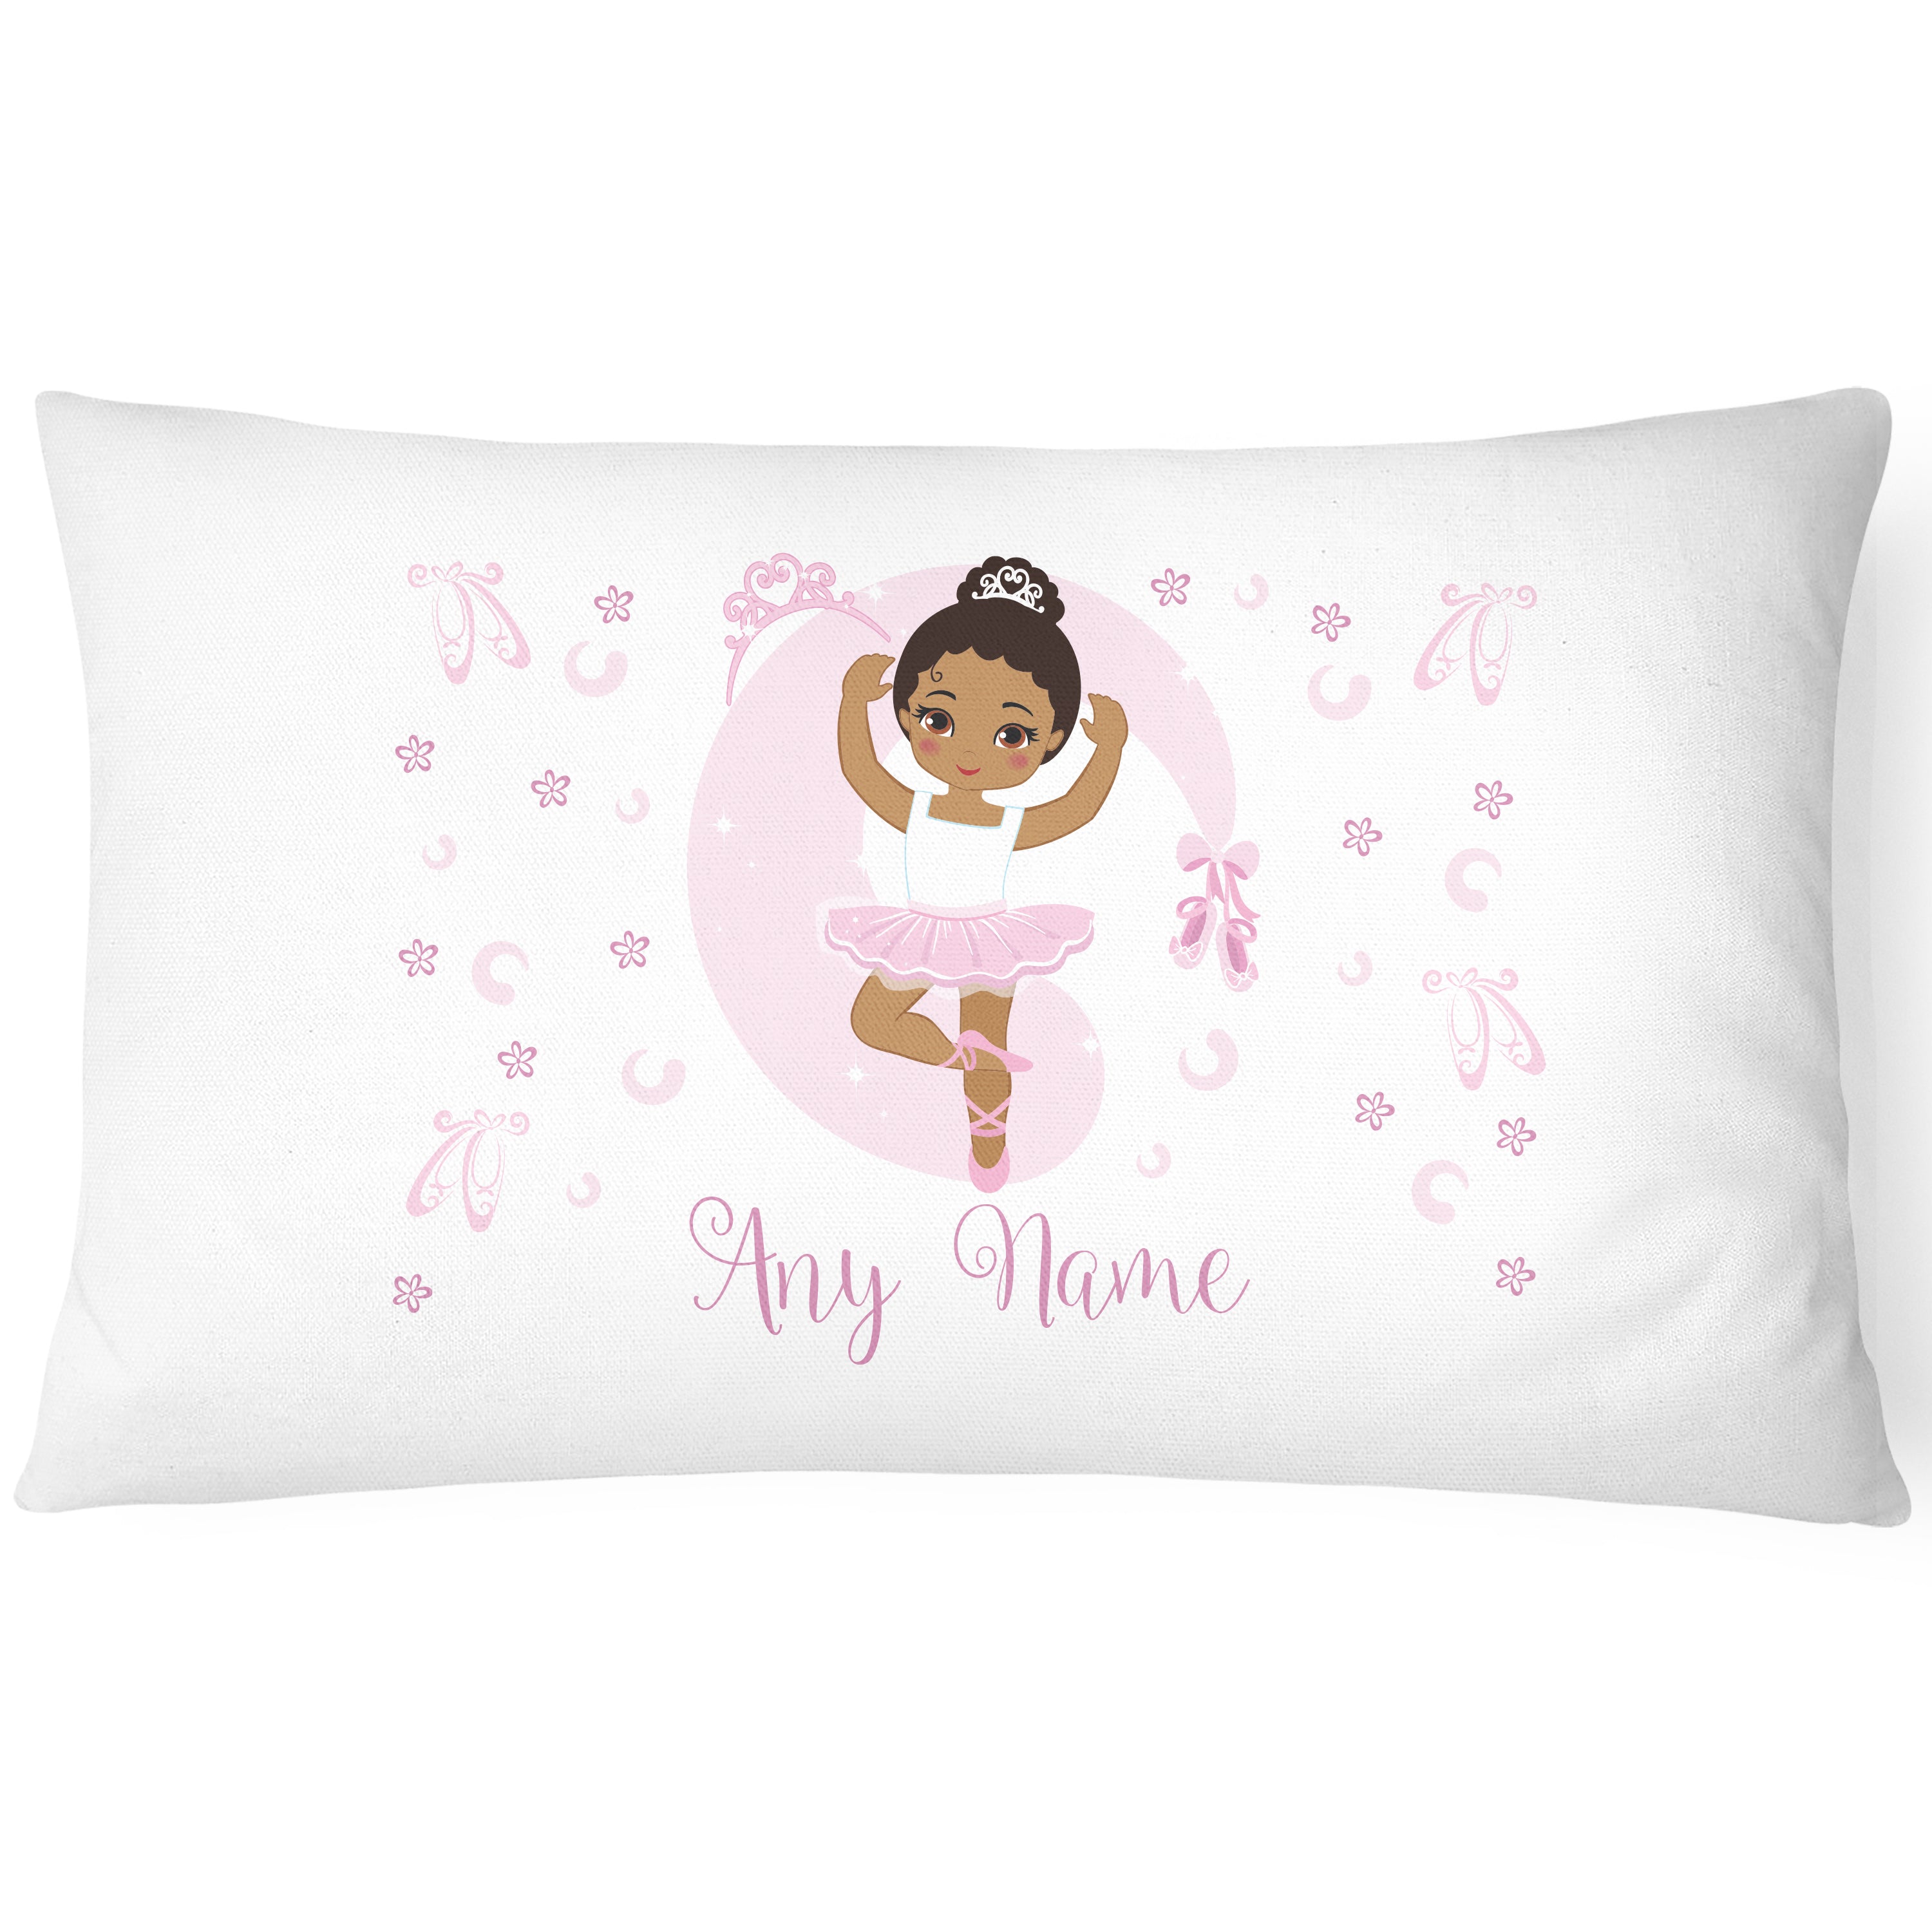 Ballerina Children's Pillowcase - Personalise with Any Name - Ballet